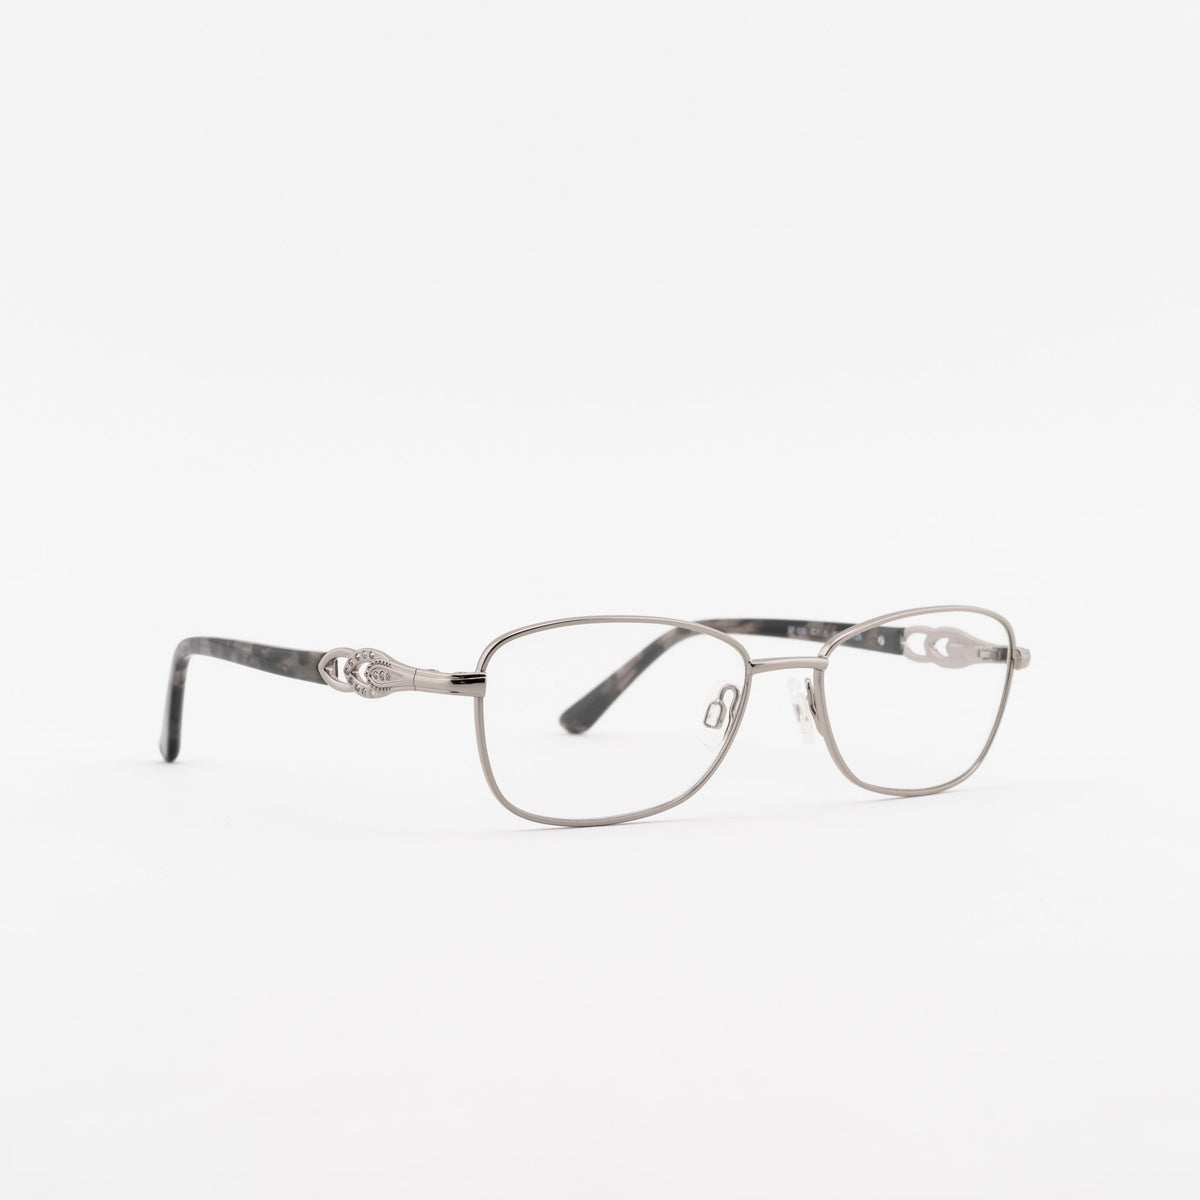 SF-530 Frames Superflex 51 C1 - SILVER BLACK Not Available